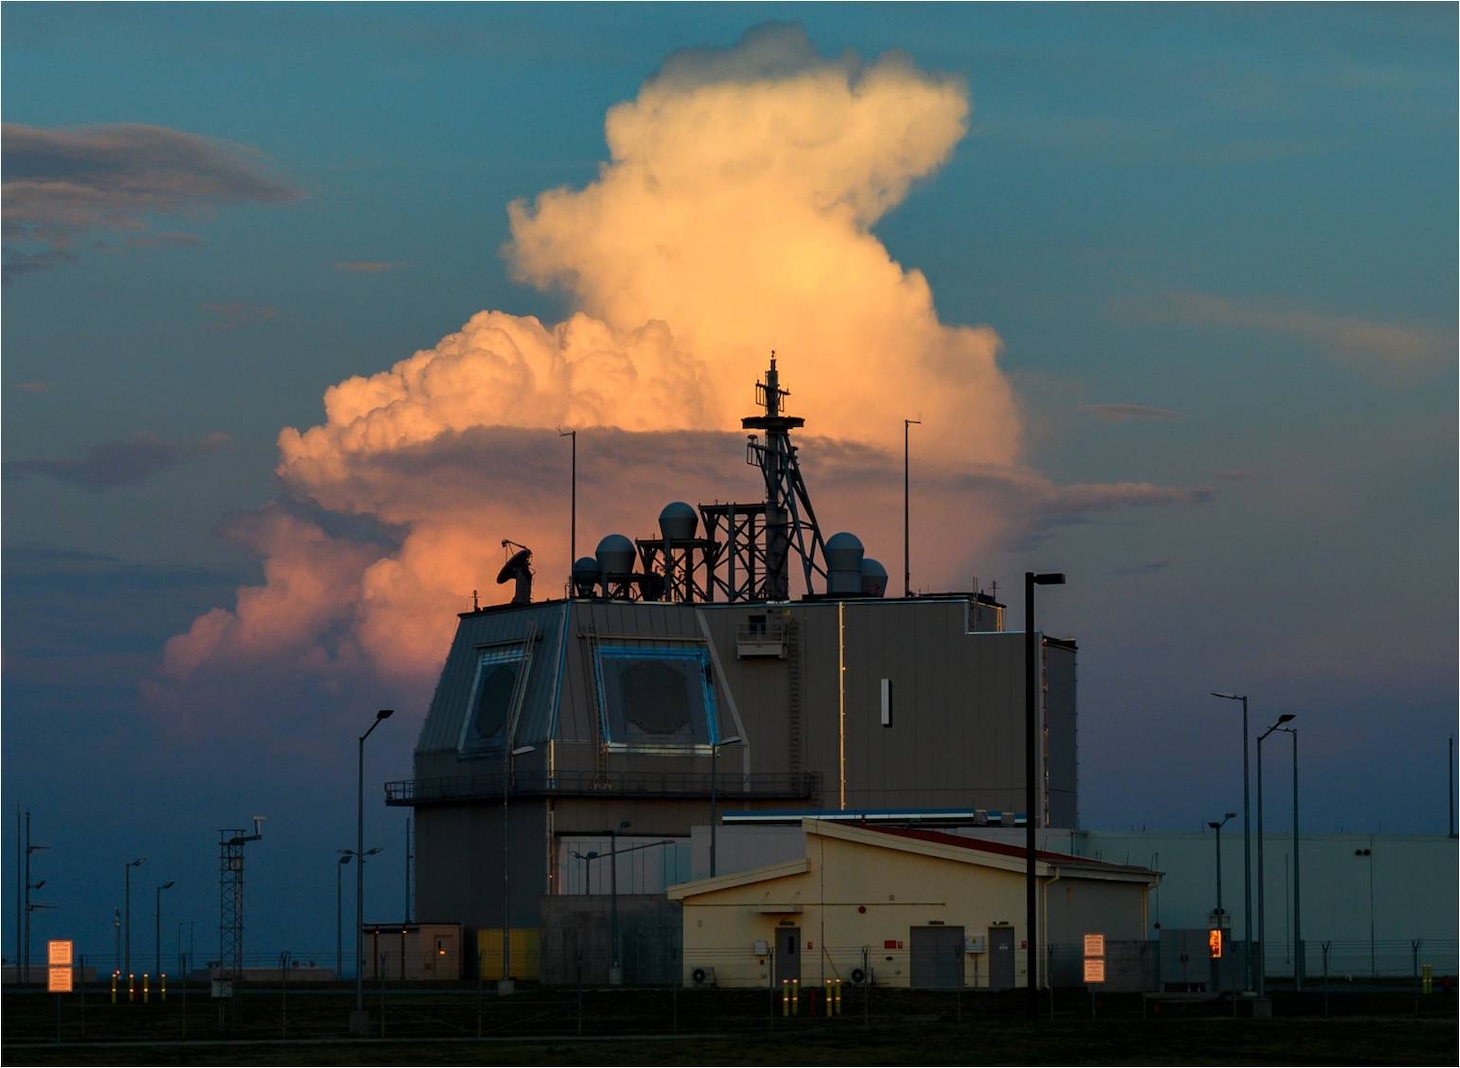 The Aegis Ashore Missile Defense System (AAMDS) located at Naval Support Facility (NSF) Deveselu, Romania, celebrated the fifth anniversary of its shift to NATO Command and Control, as a U.S. contribution of capability to the Alliance, August 19, 2021.